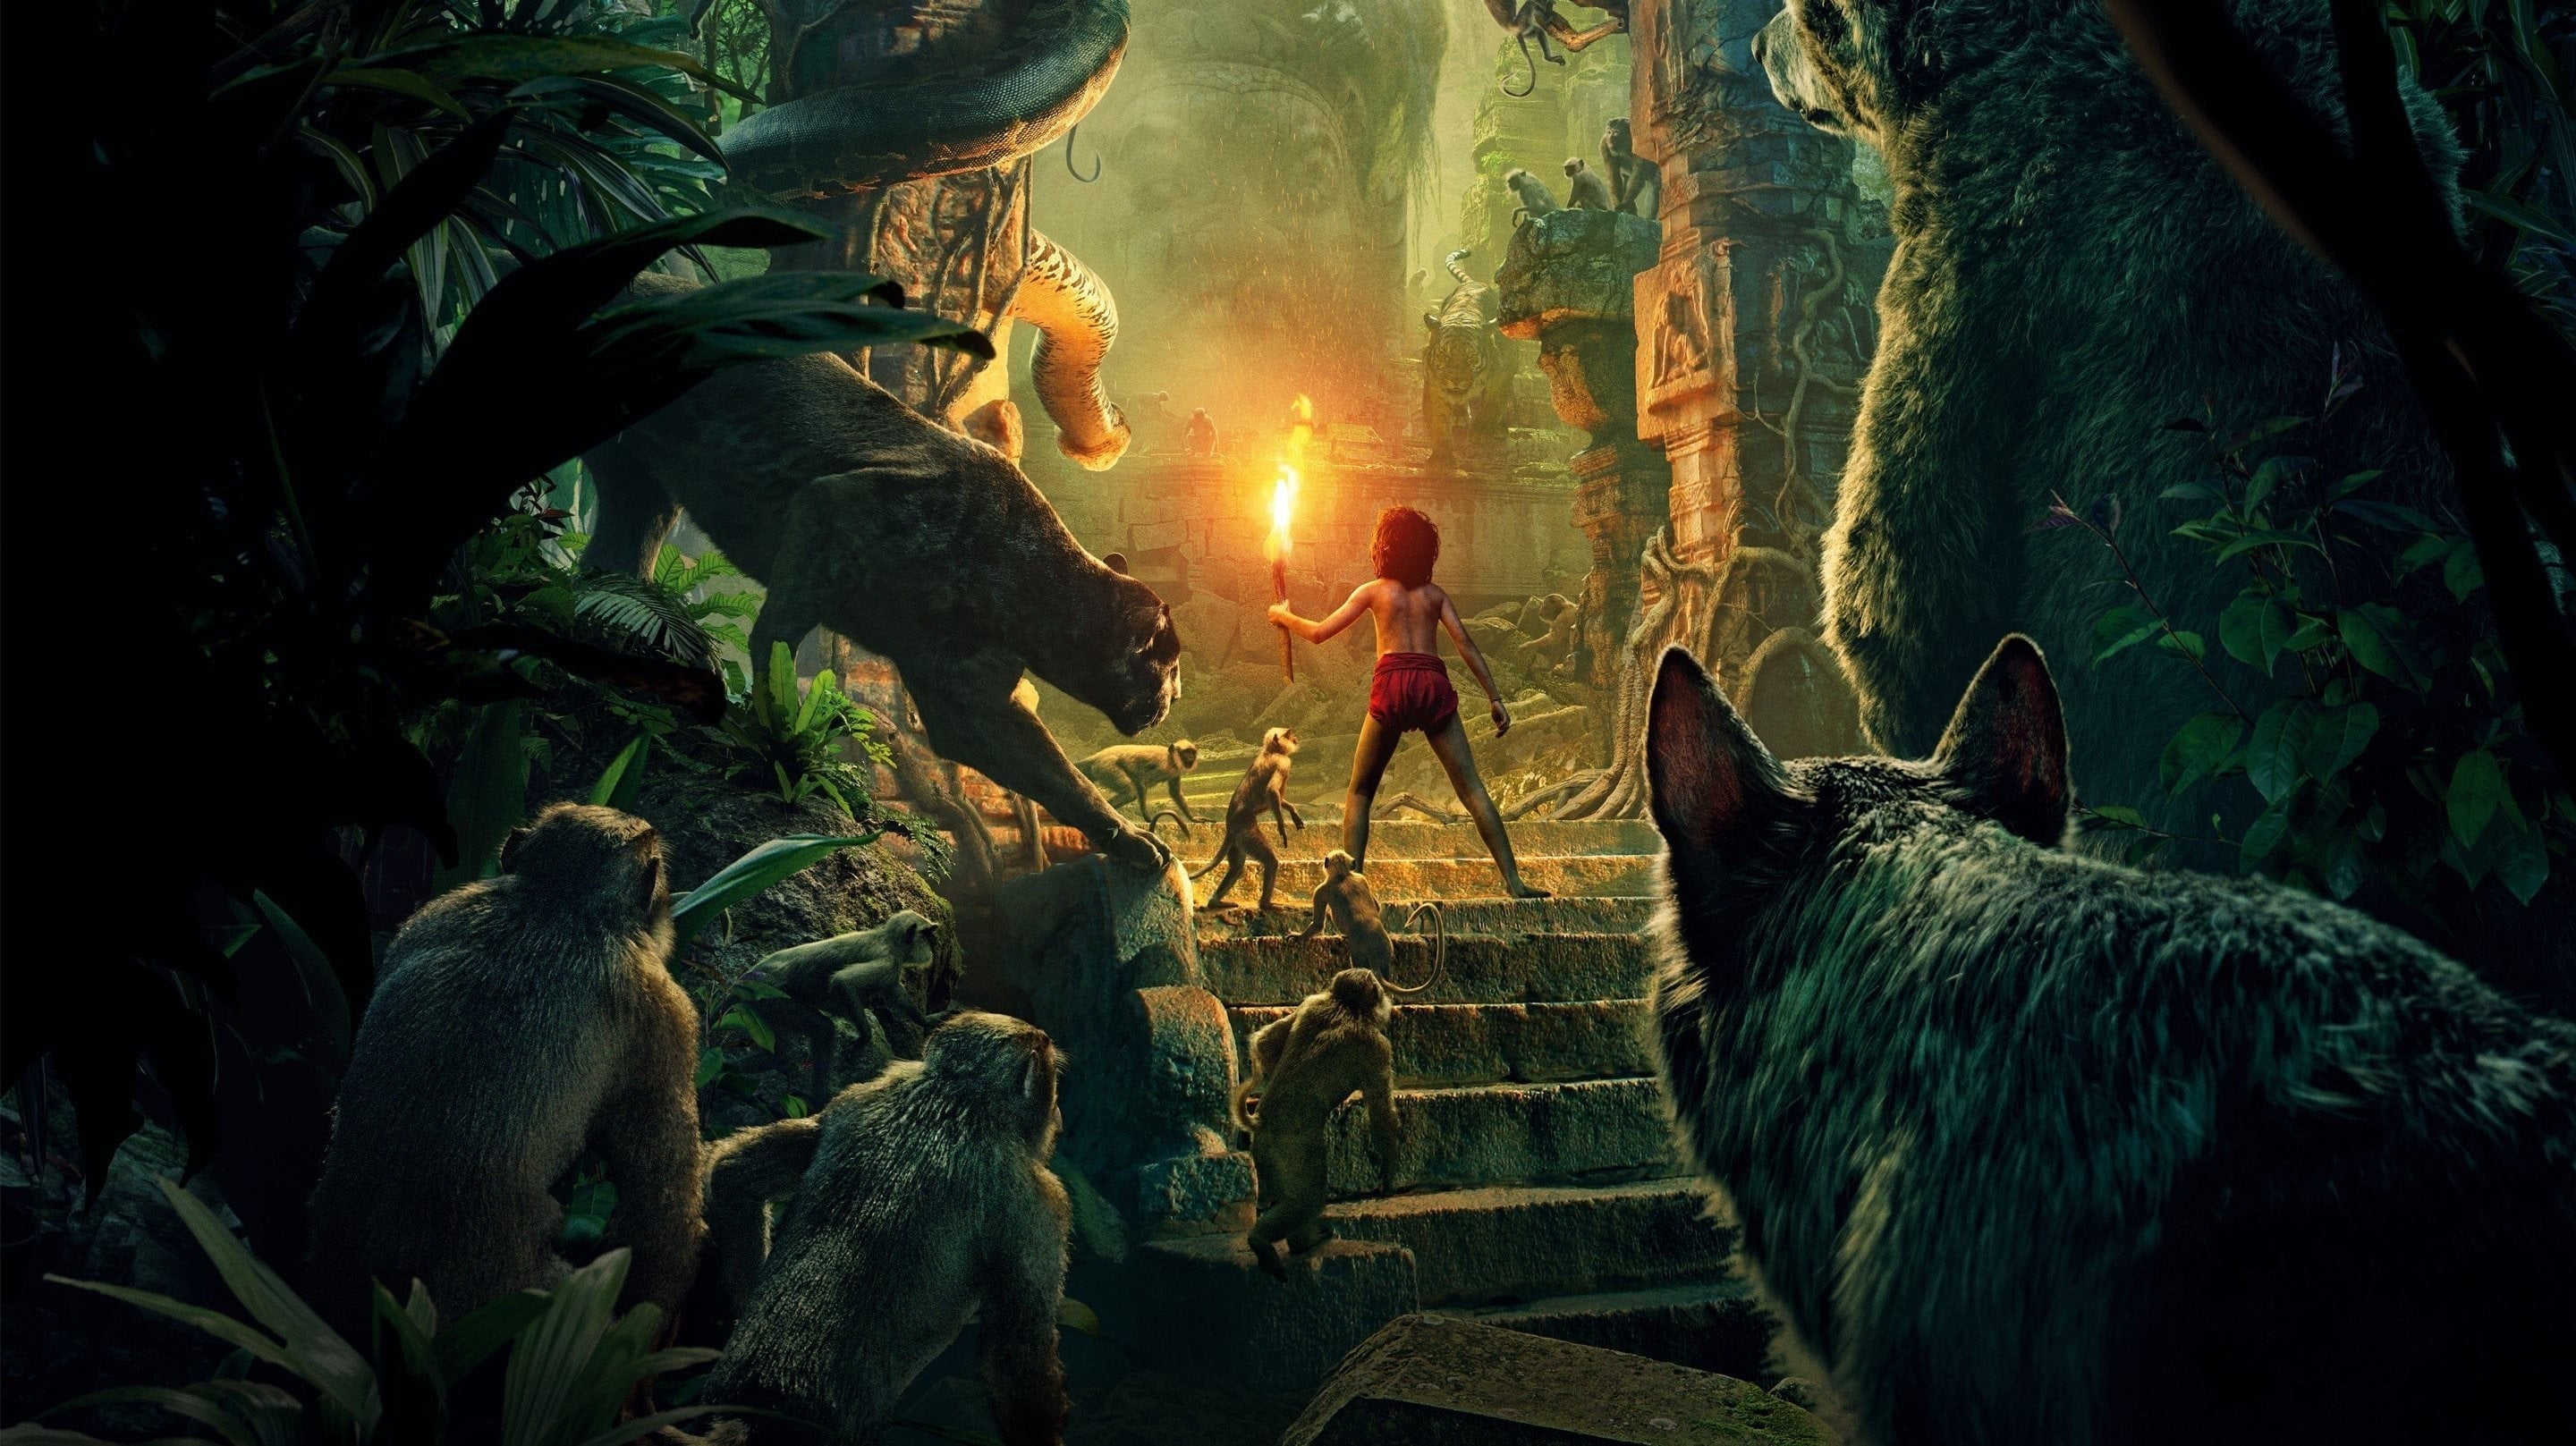 The Jungle Book 2016 123movies